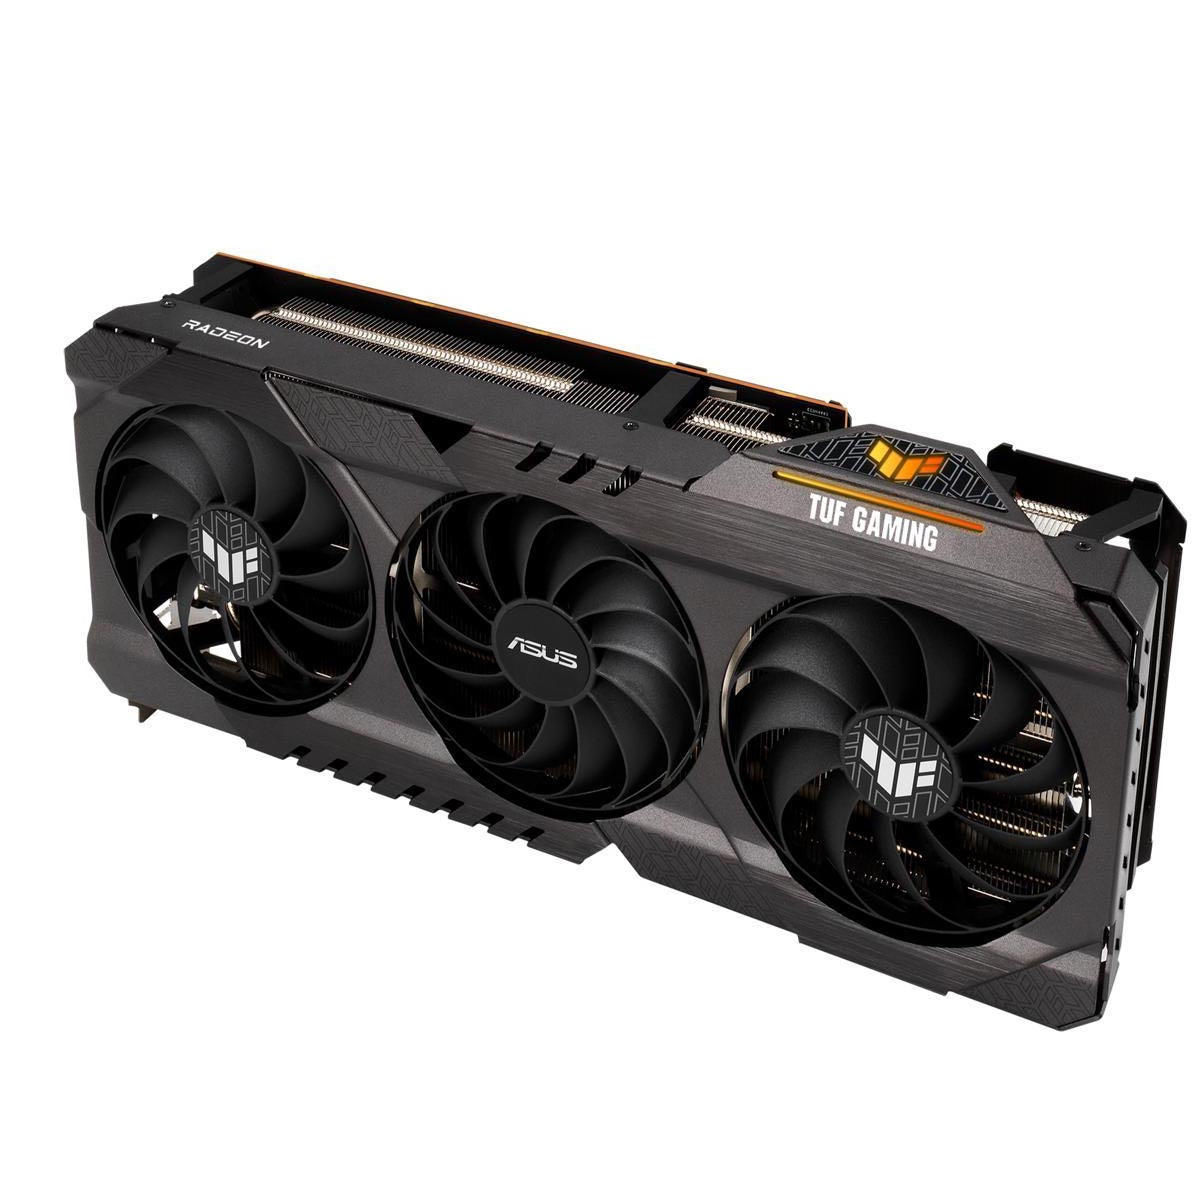 ASUS TUF Gaming Radeon RX 6800 XT Graphics Card 16GB OC Edition GDDR6 256-Bit with RDNA 2 Architecture